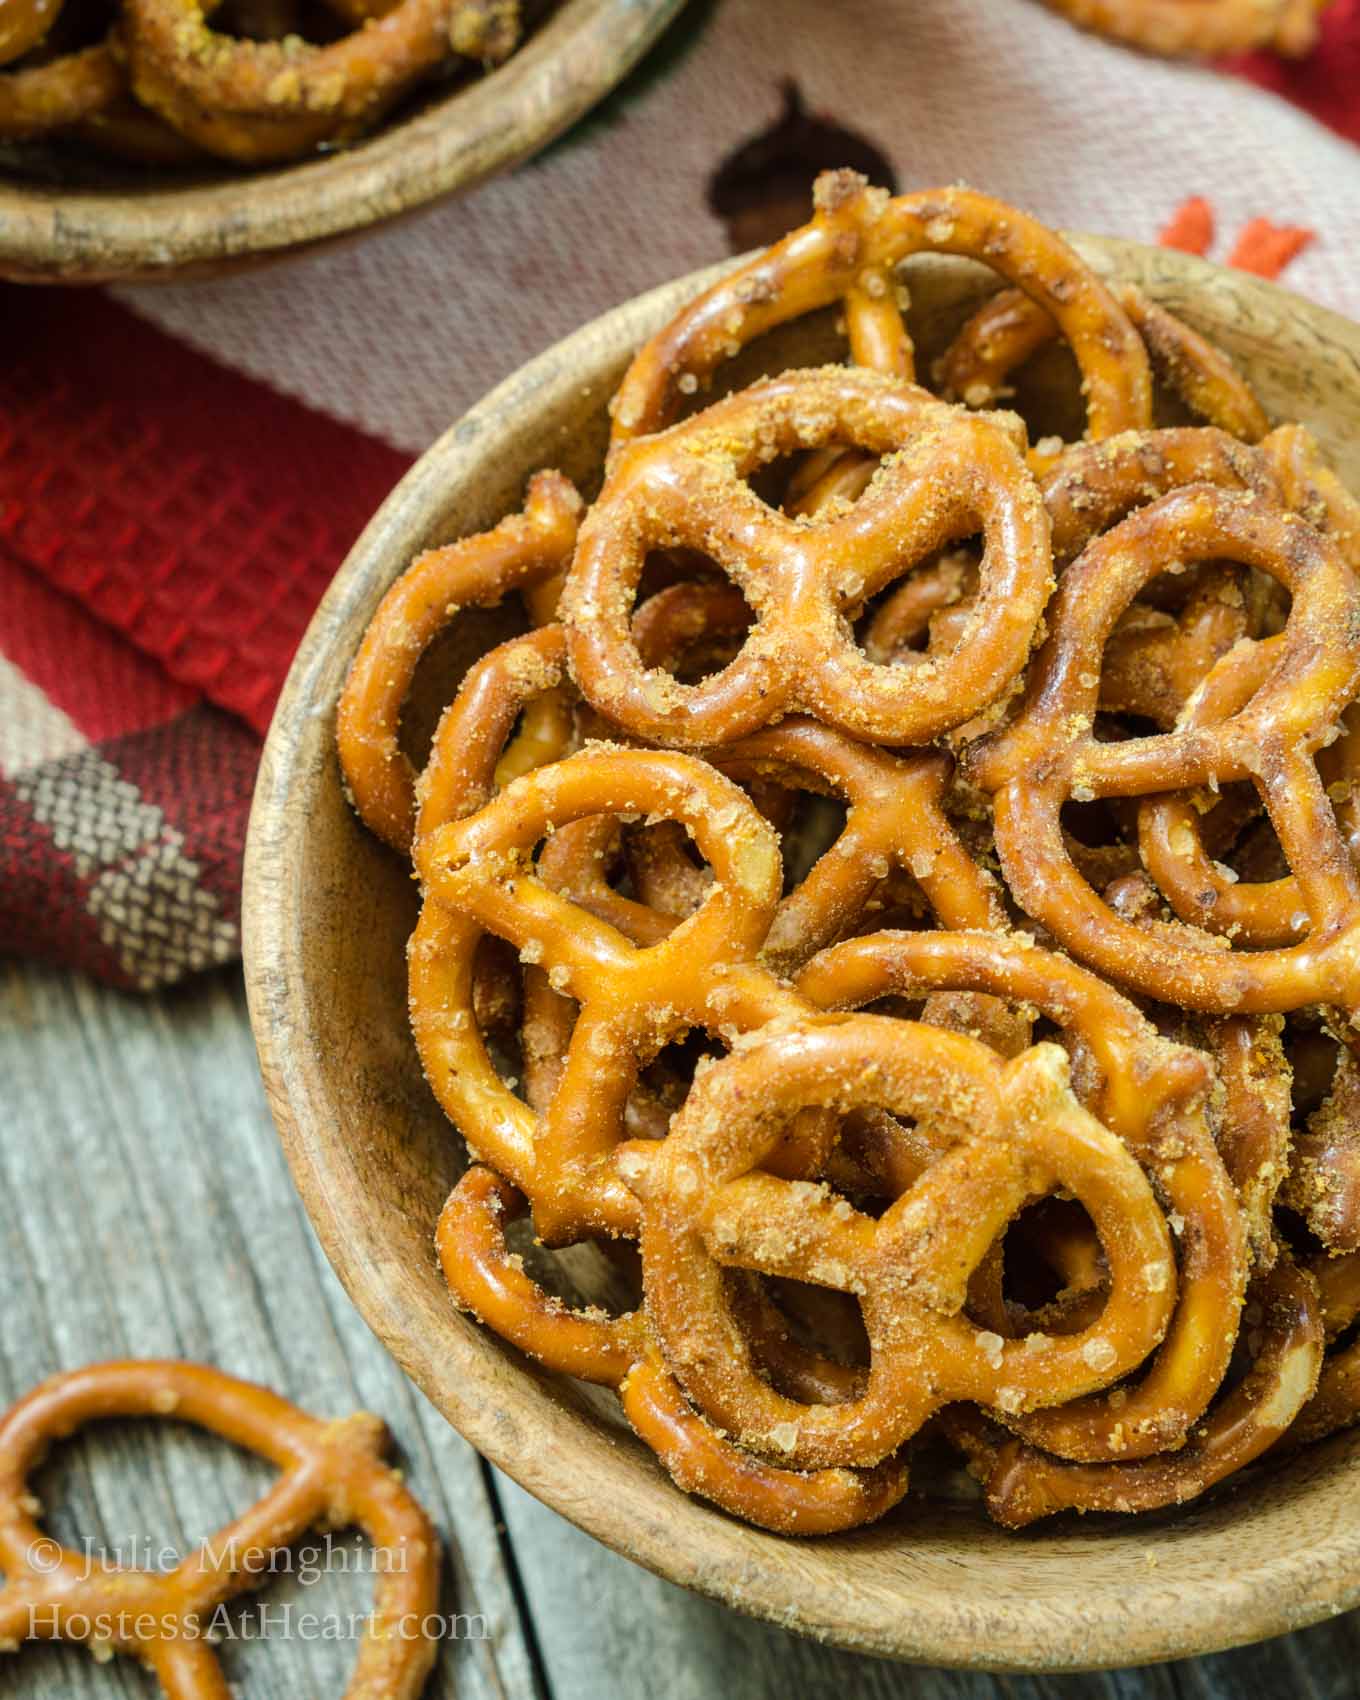 Top-down view of a wooden bowl filled with pretzels that have been baked in a spicy Nacho Cheese seasoning. A second bowl of pretzels sits in the background over a wooden background.